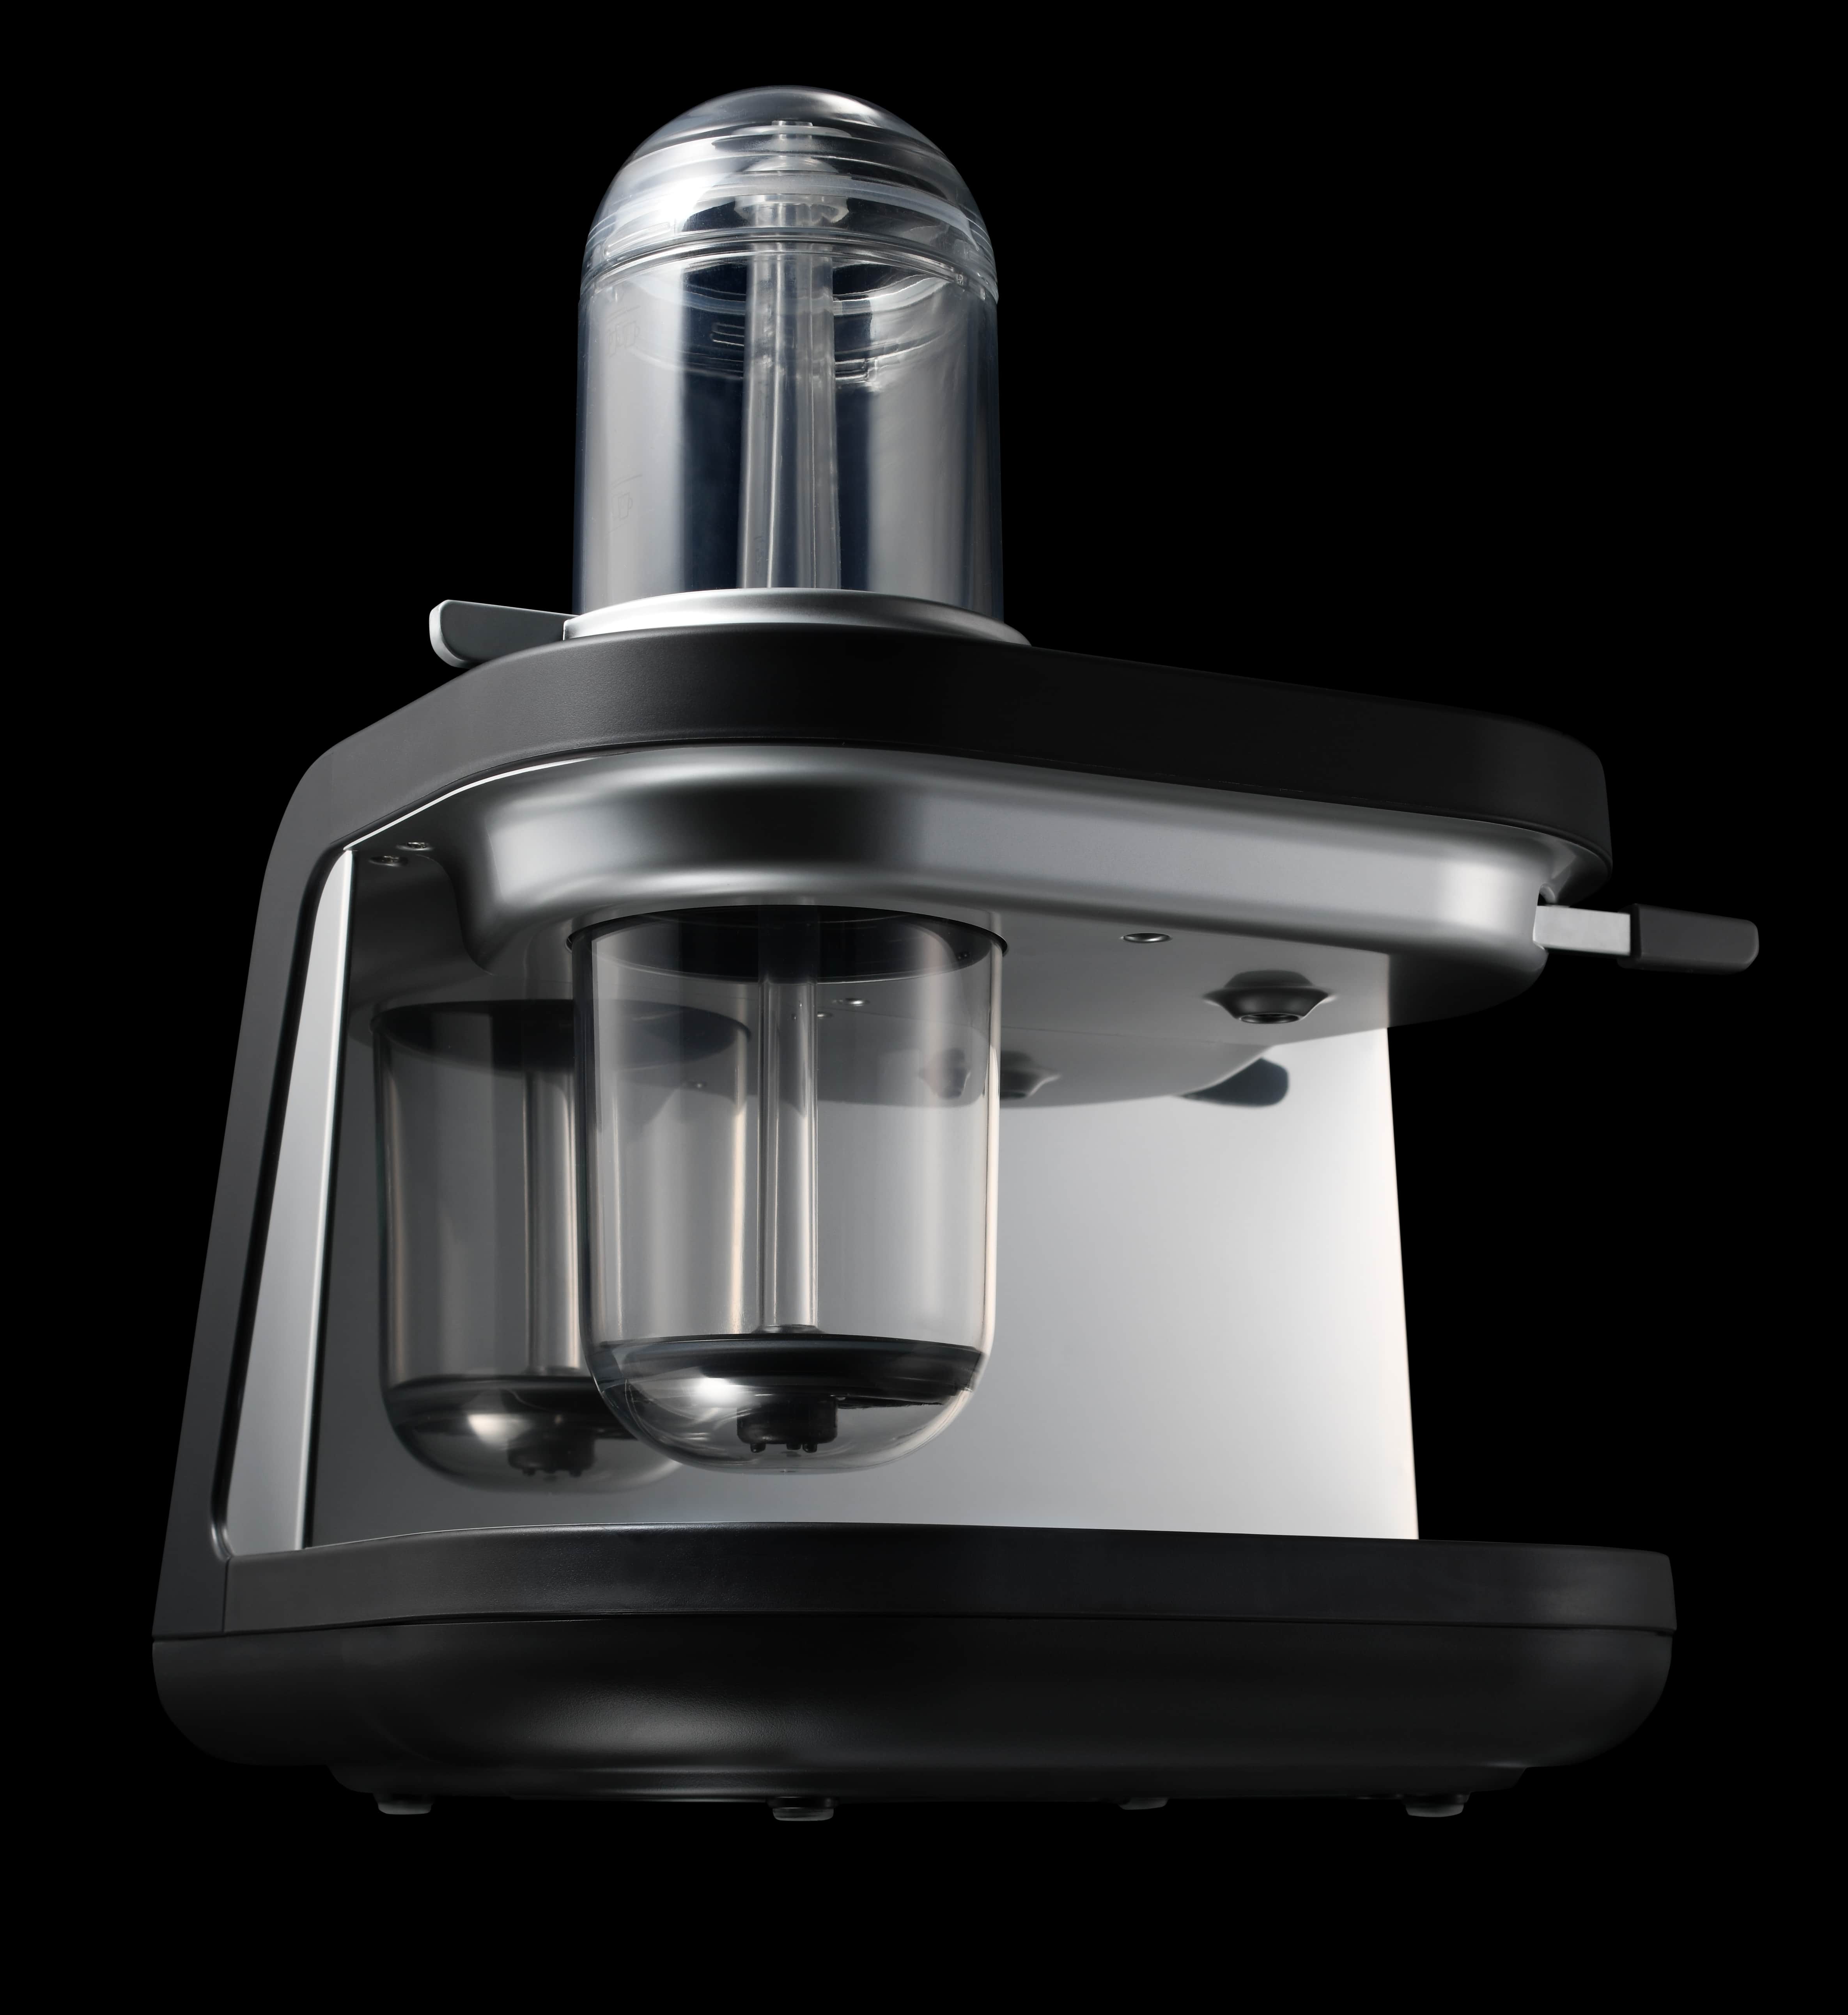 Siphonsysta, an automated siphon coffee brewing system